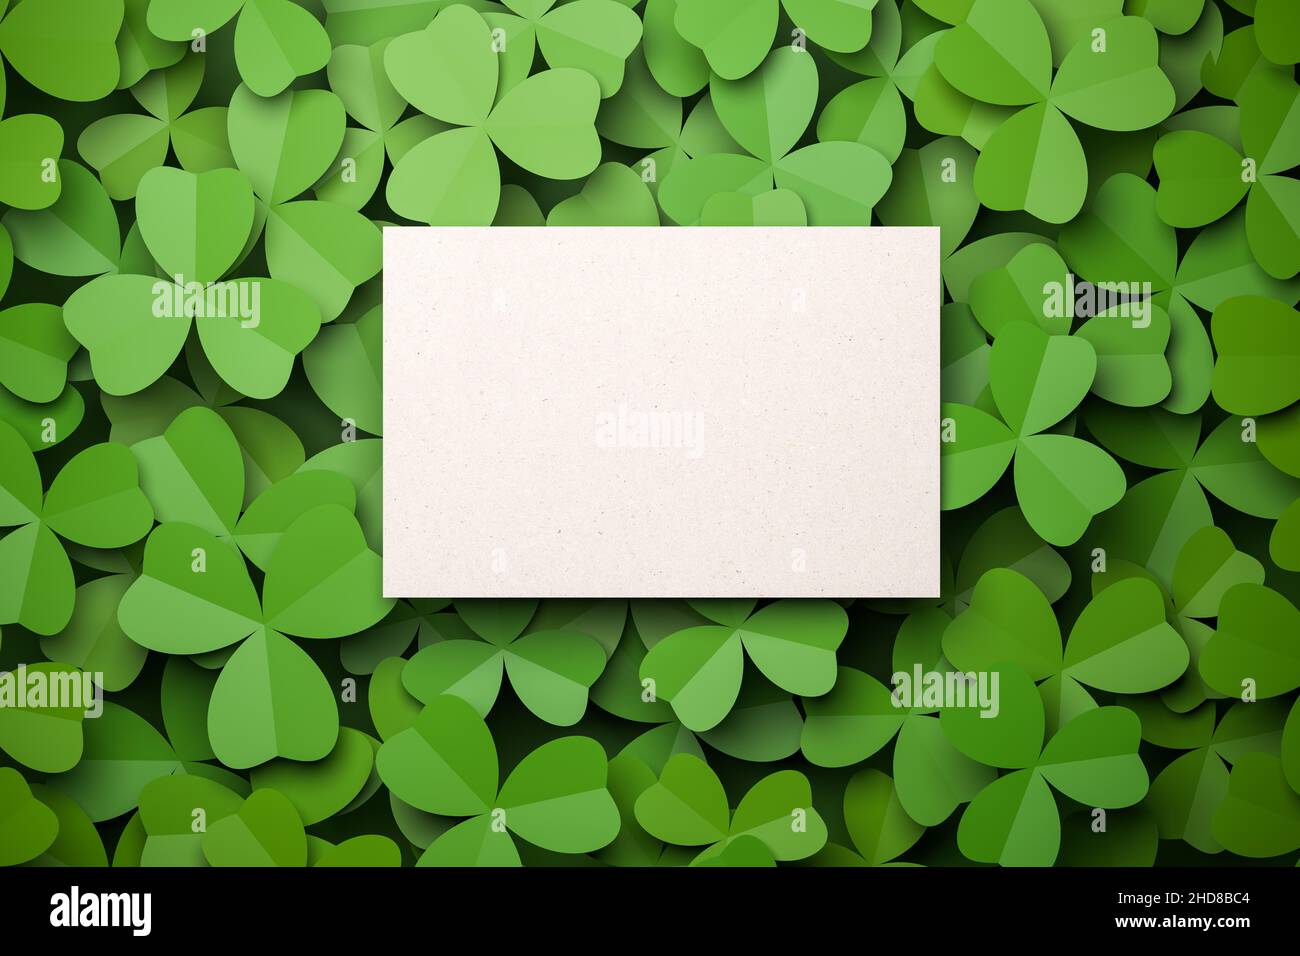 Cloverleaf background with an empty card for own text in the middle. Spring or St. Patrick's Day concept. Stock Photo